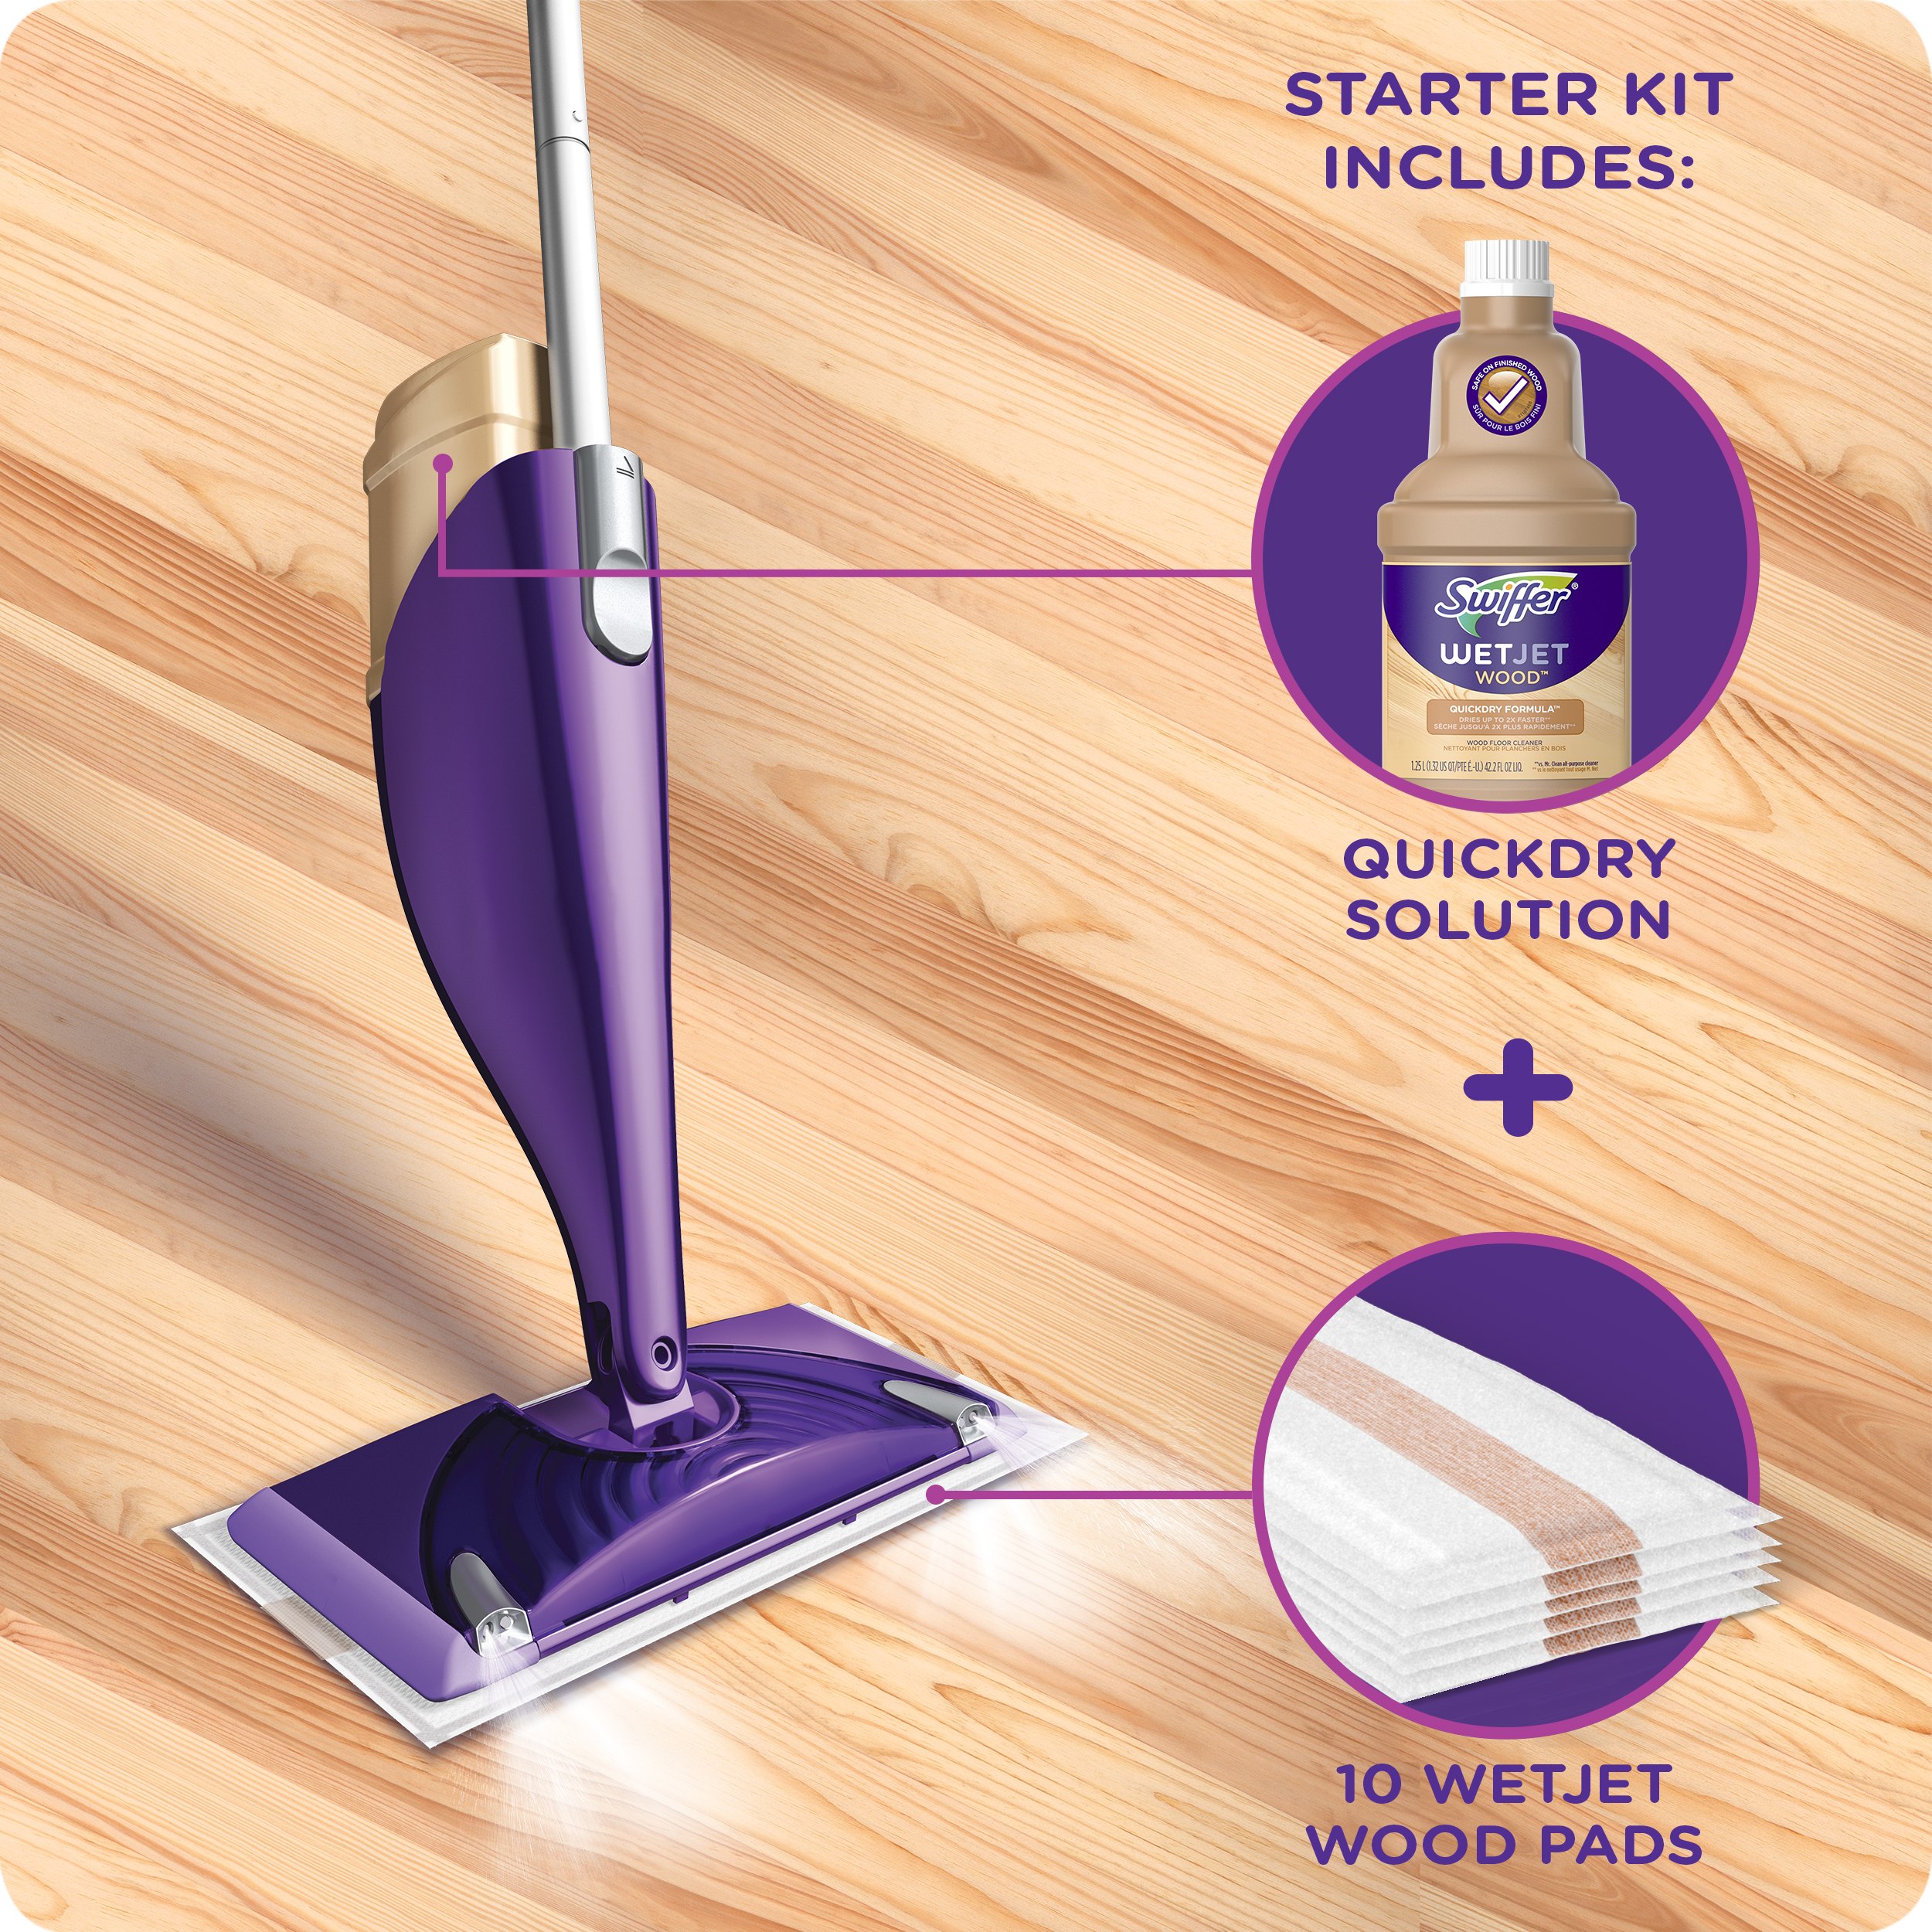 Swiffer WetJet Wood Mop Kit (1 Spray Mop, 5 Mopping Pads, 1 Cleaning Solution) - image 3 of 12